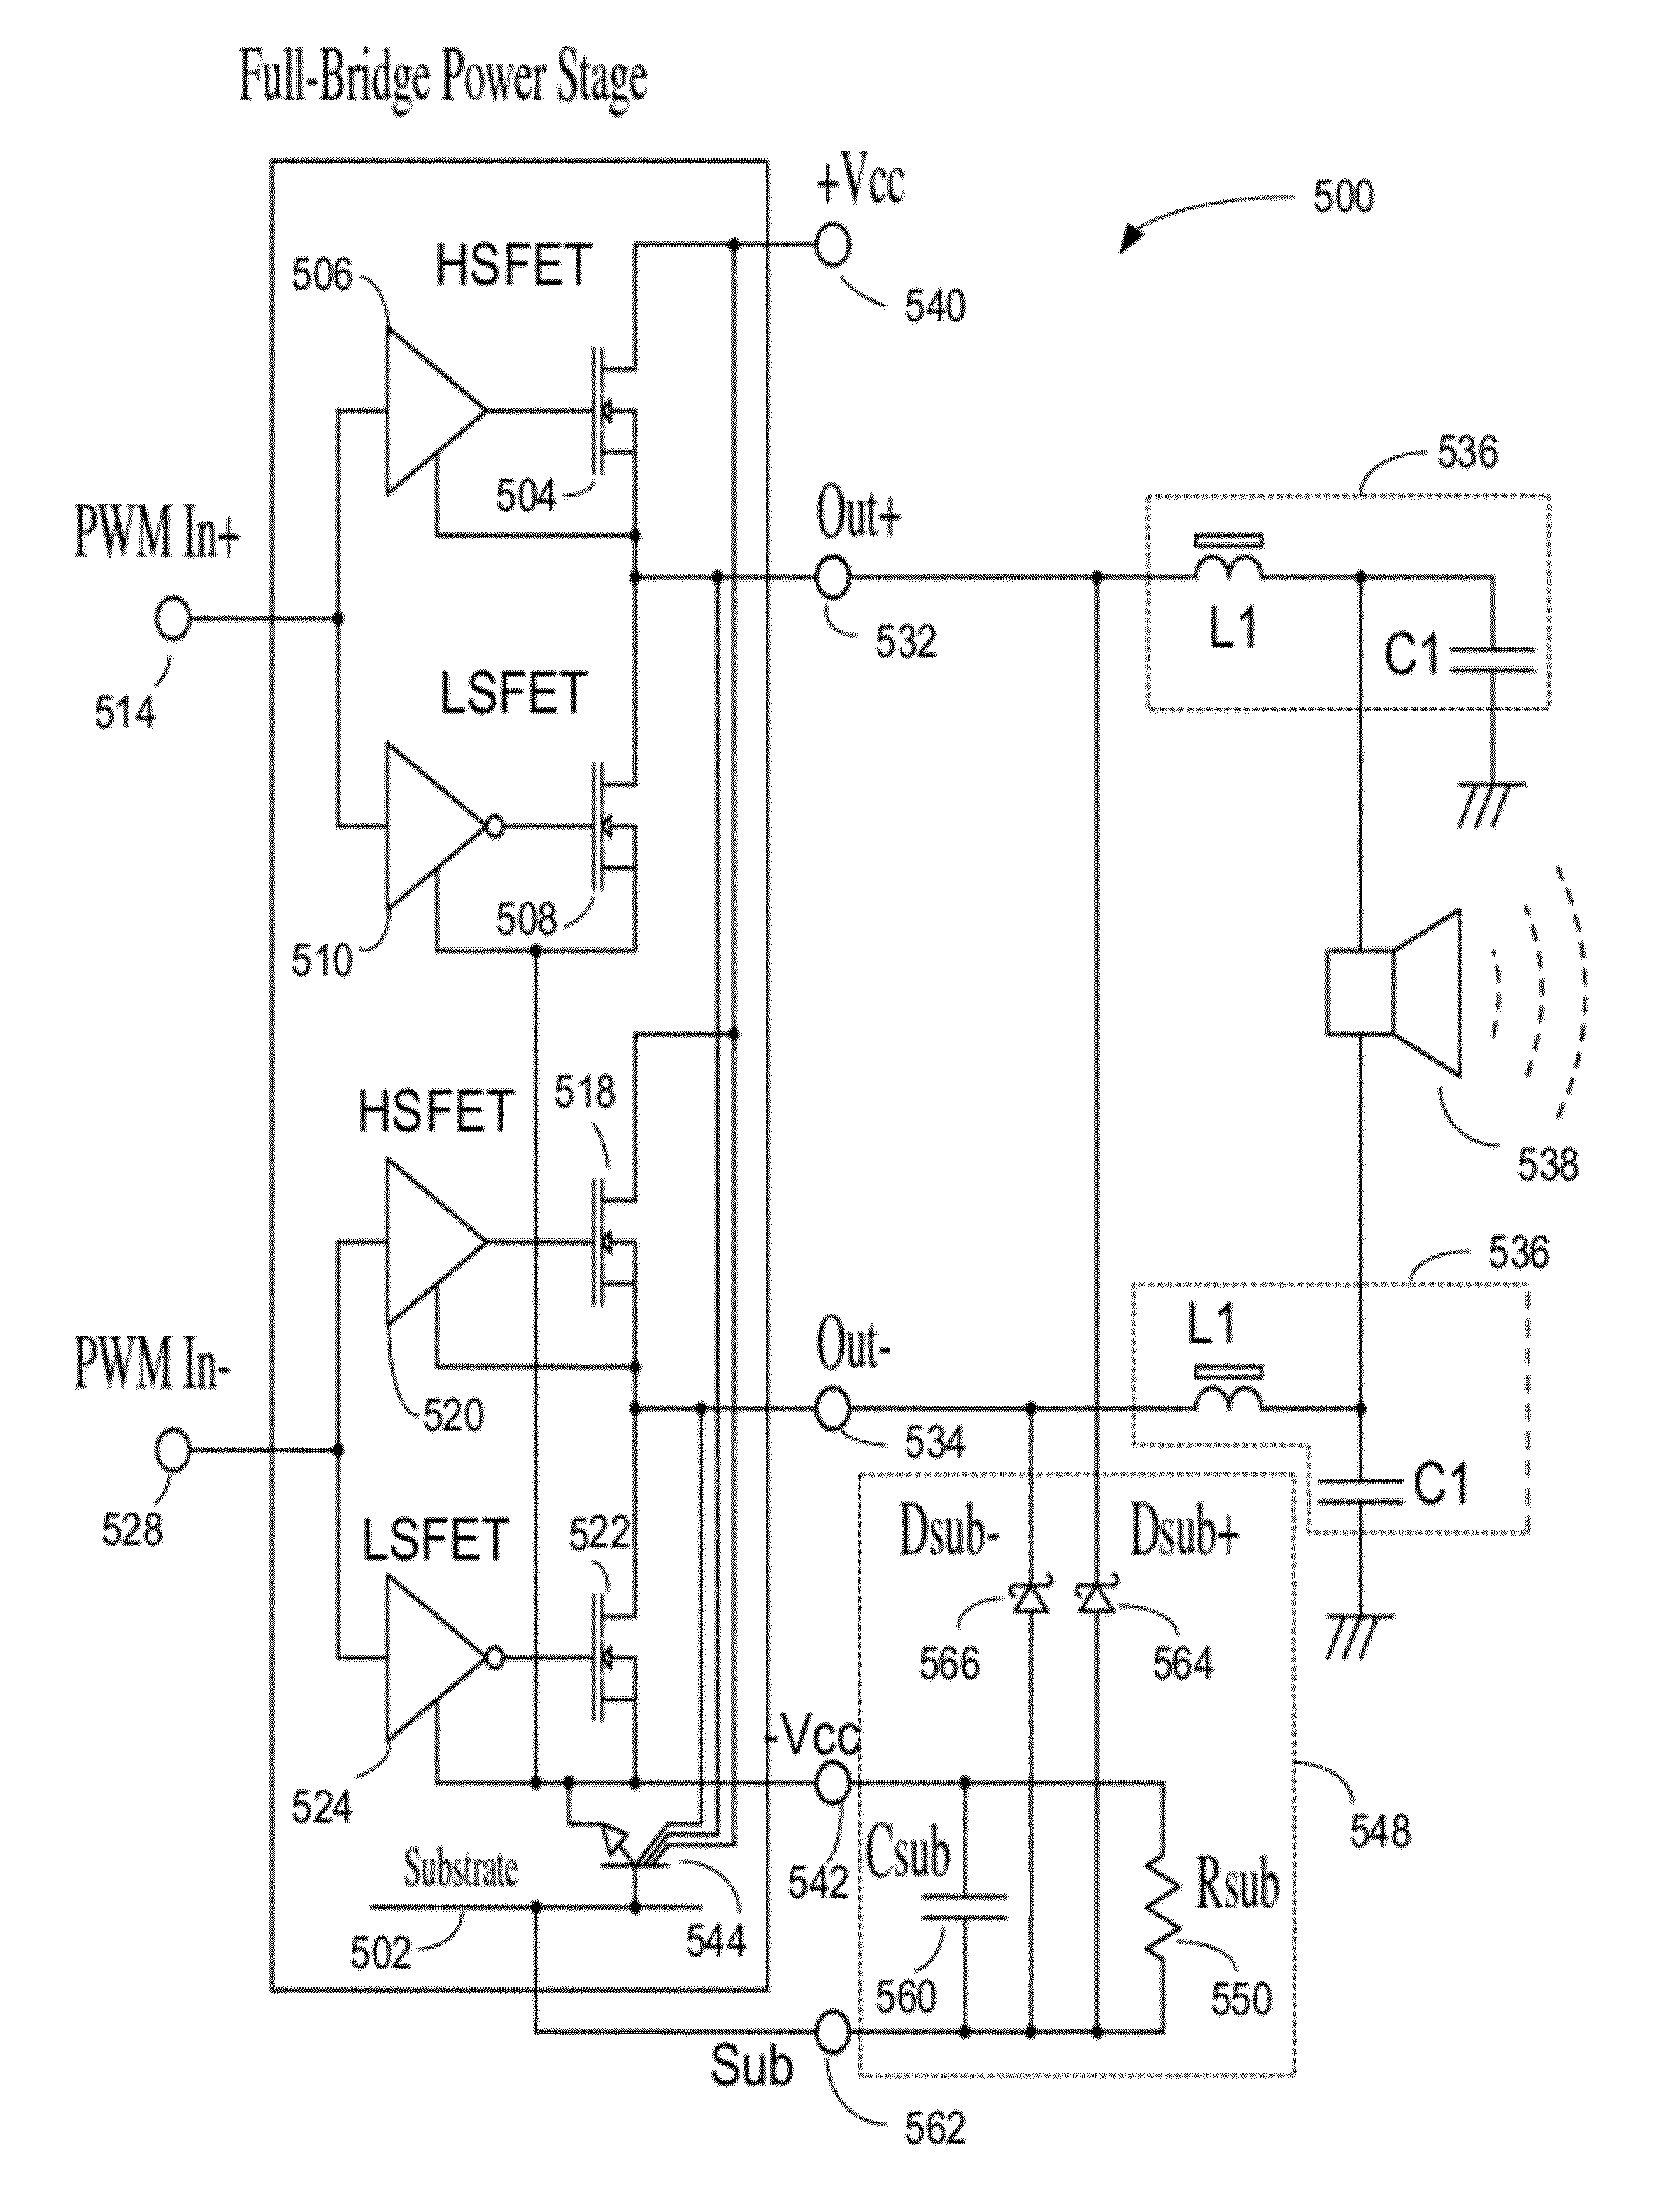 Amplifier system for a power converter